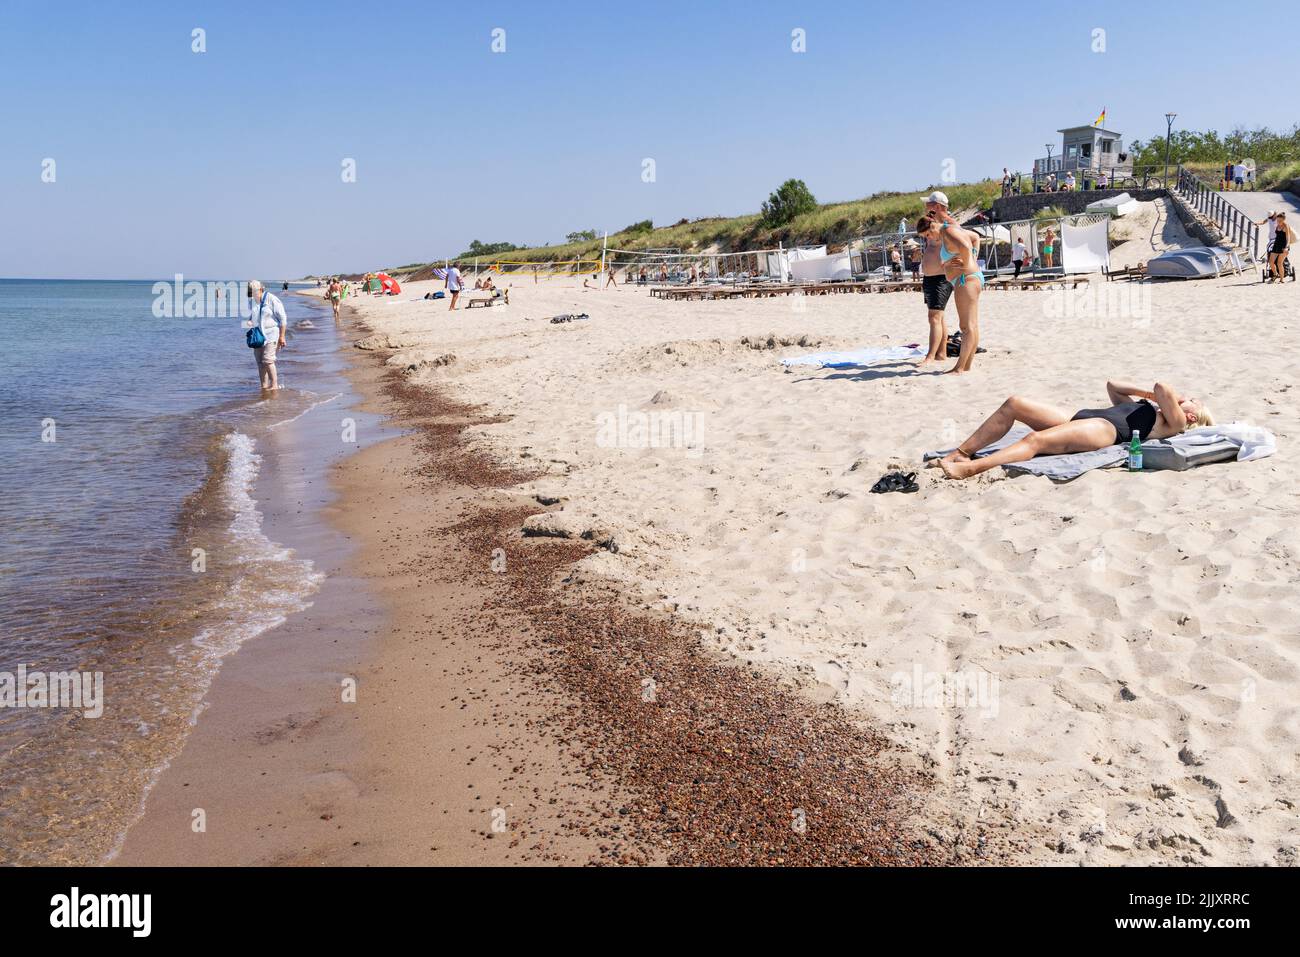 Lithuania beach; people enjoying the sandy beach in summer on the Baltic Sea coast on the Curonian Spit, Lithuania, Europe Stock Photo